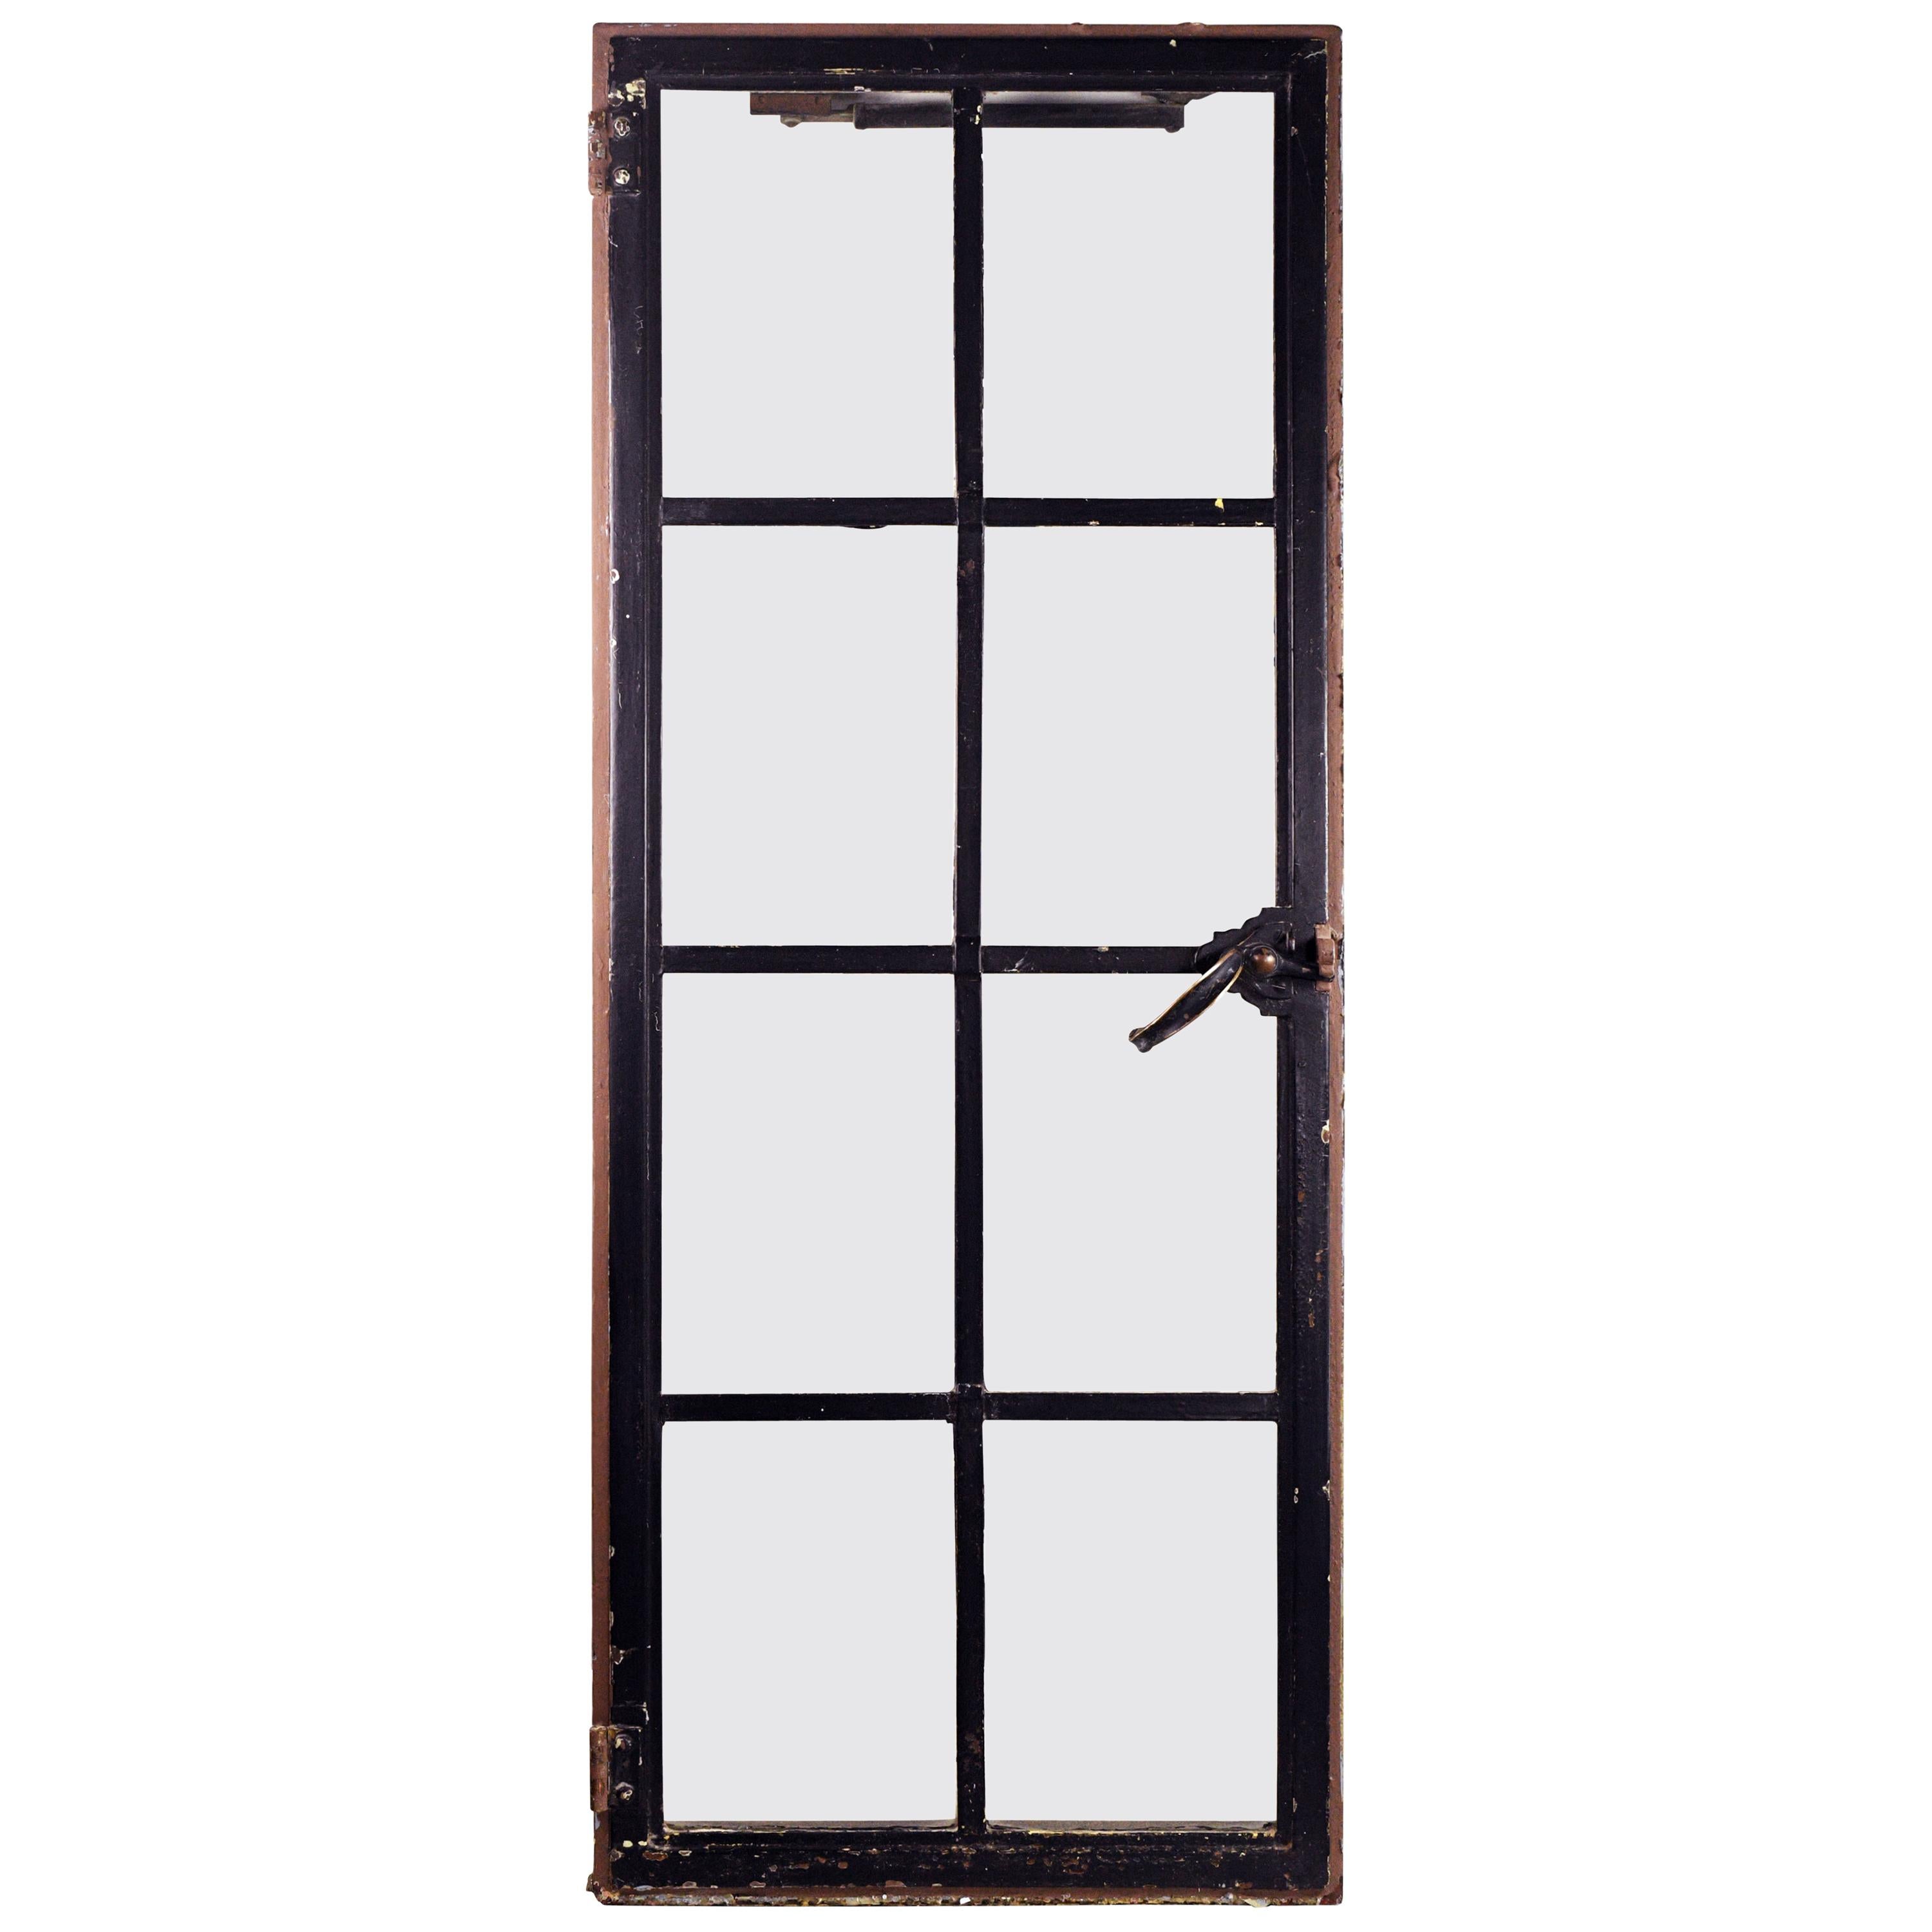 Iron Frame Window with Tempered Glass